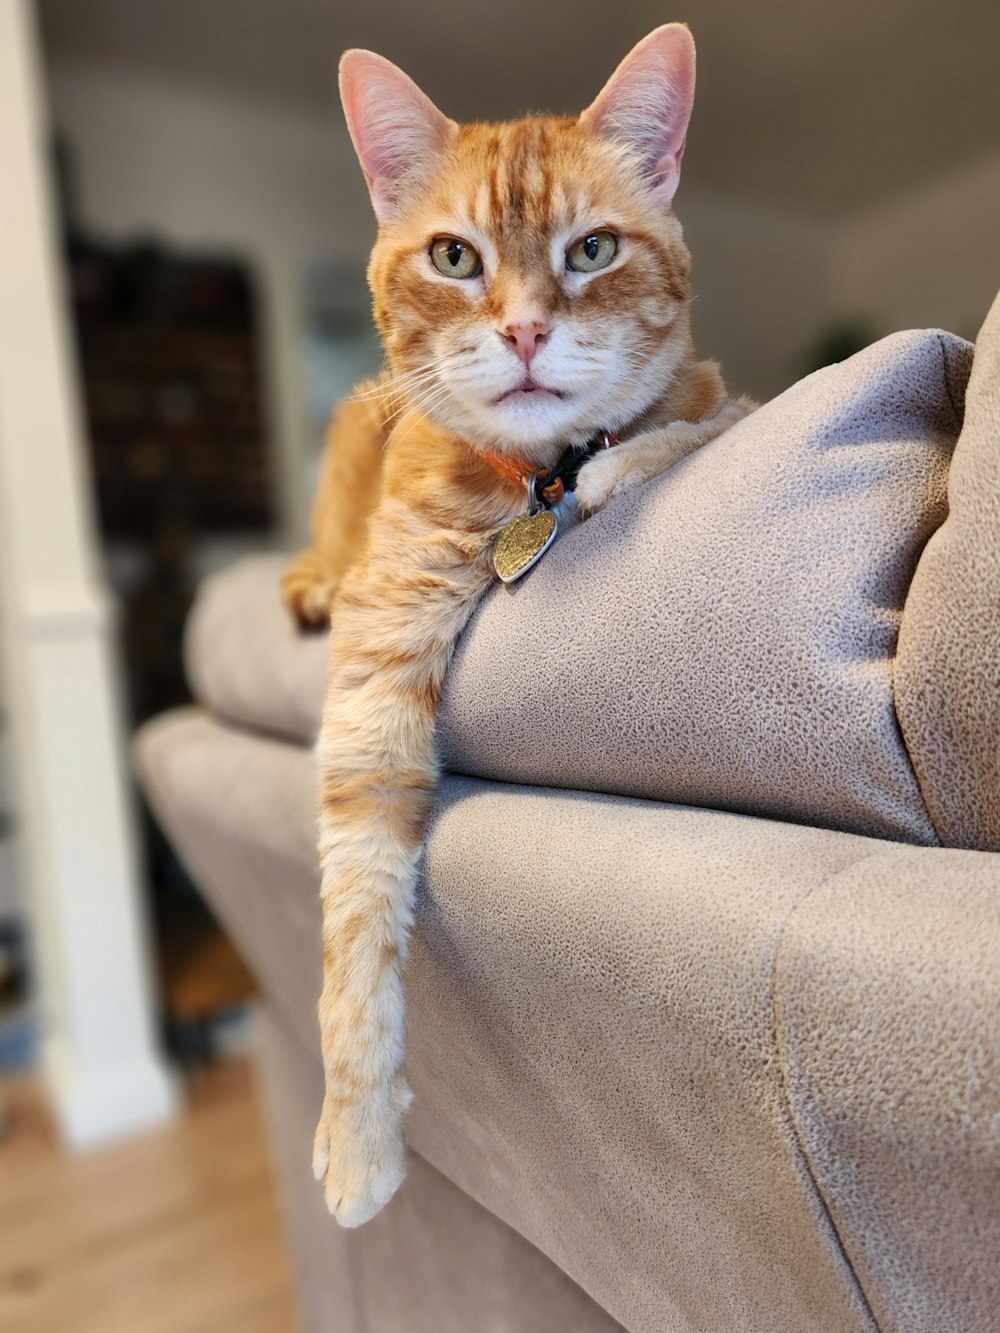 a cat is sitting on a couch and looking at the camera